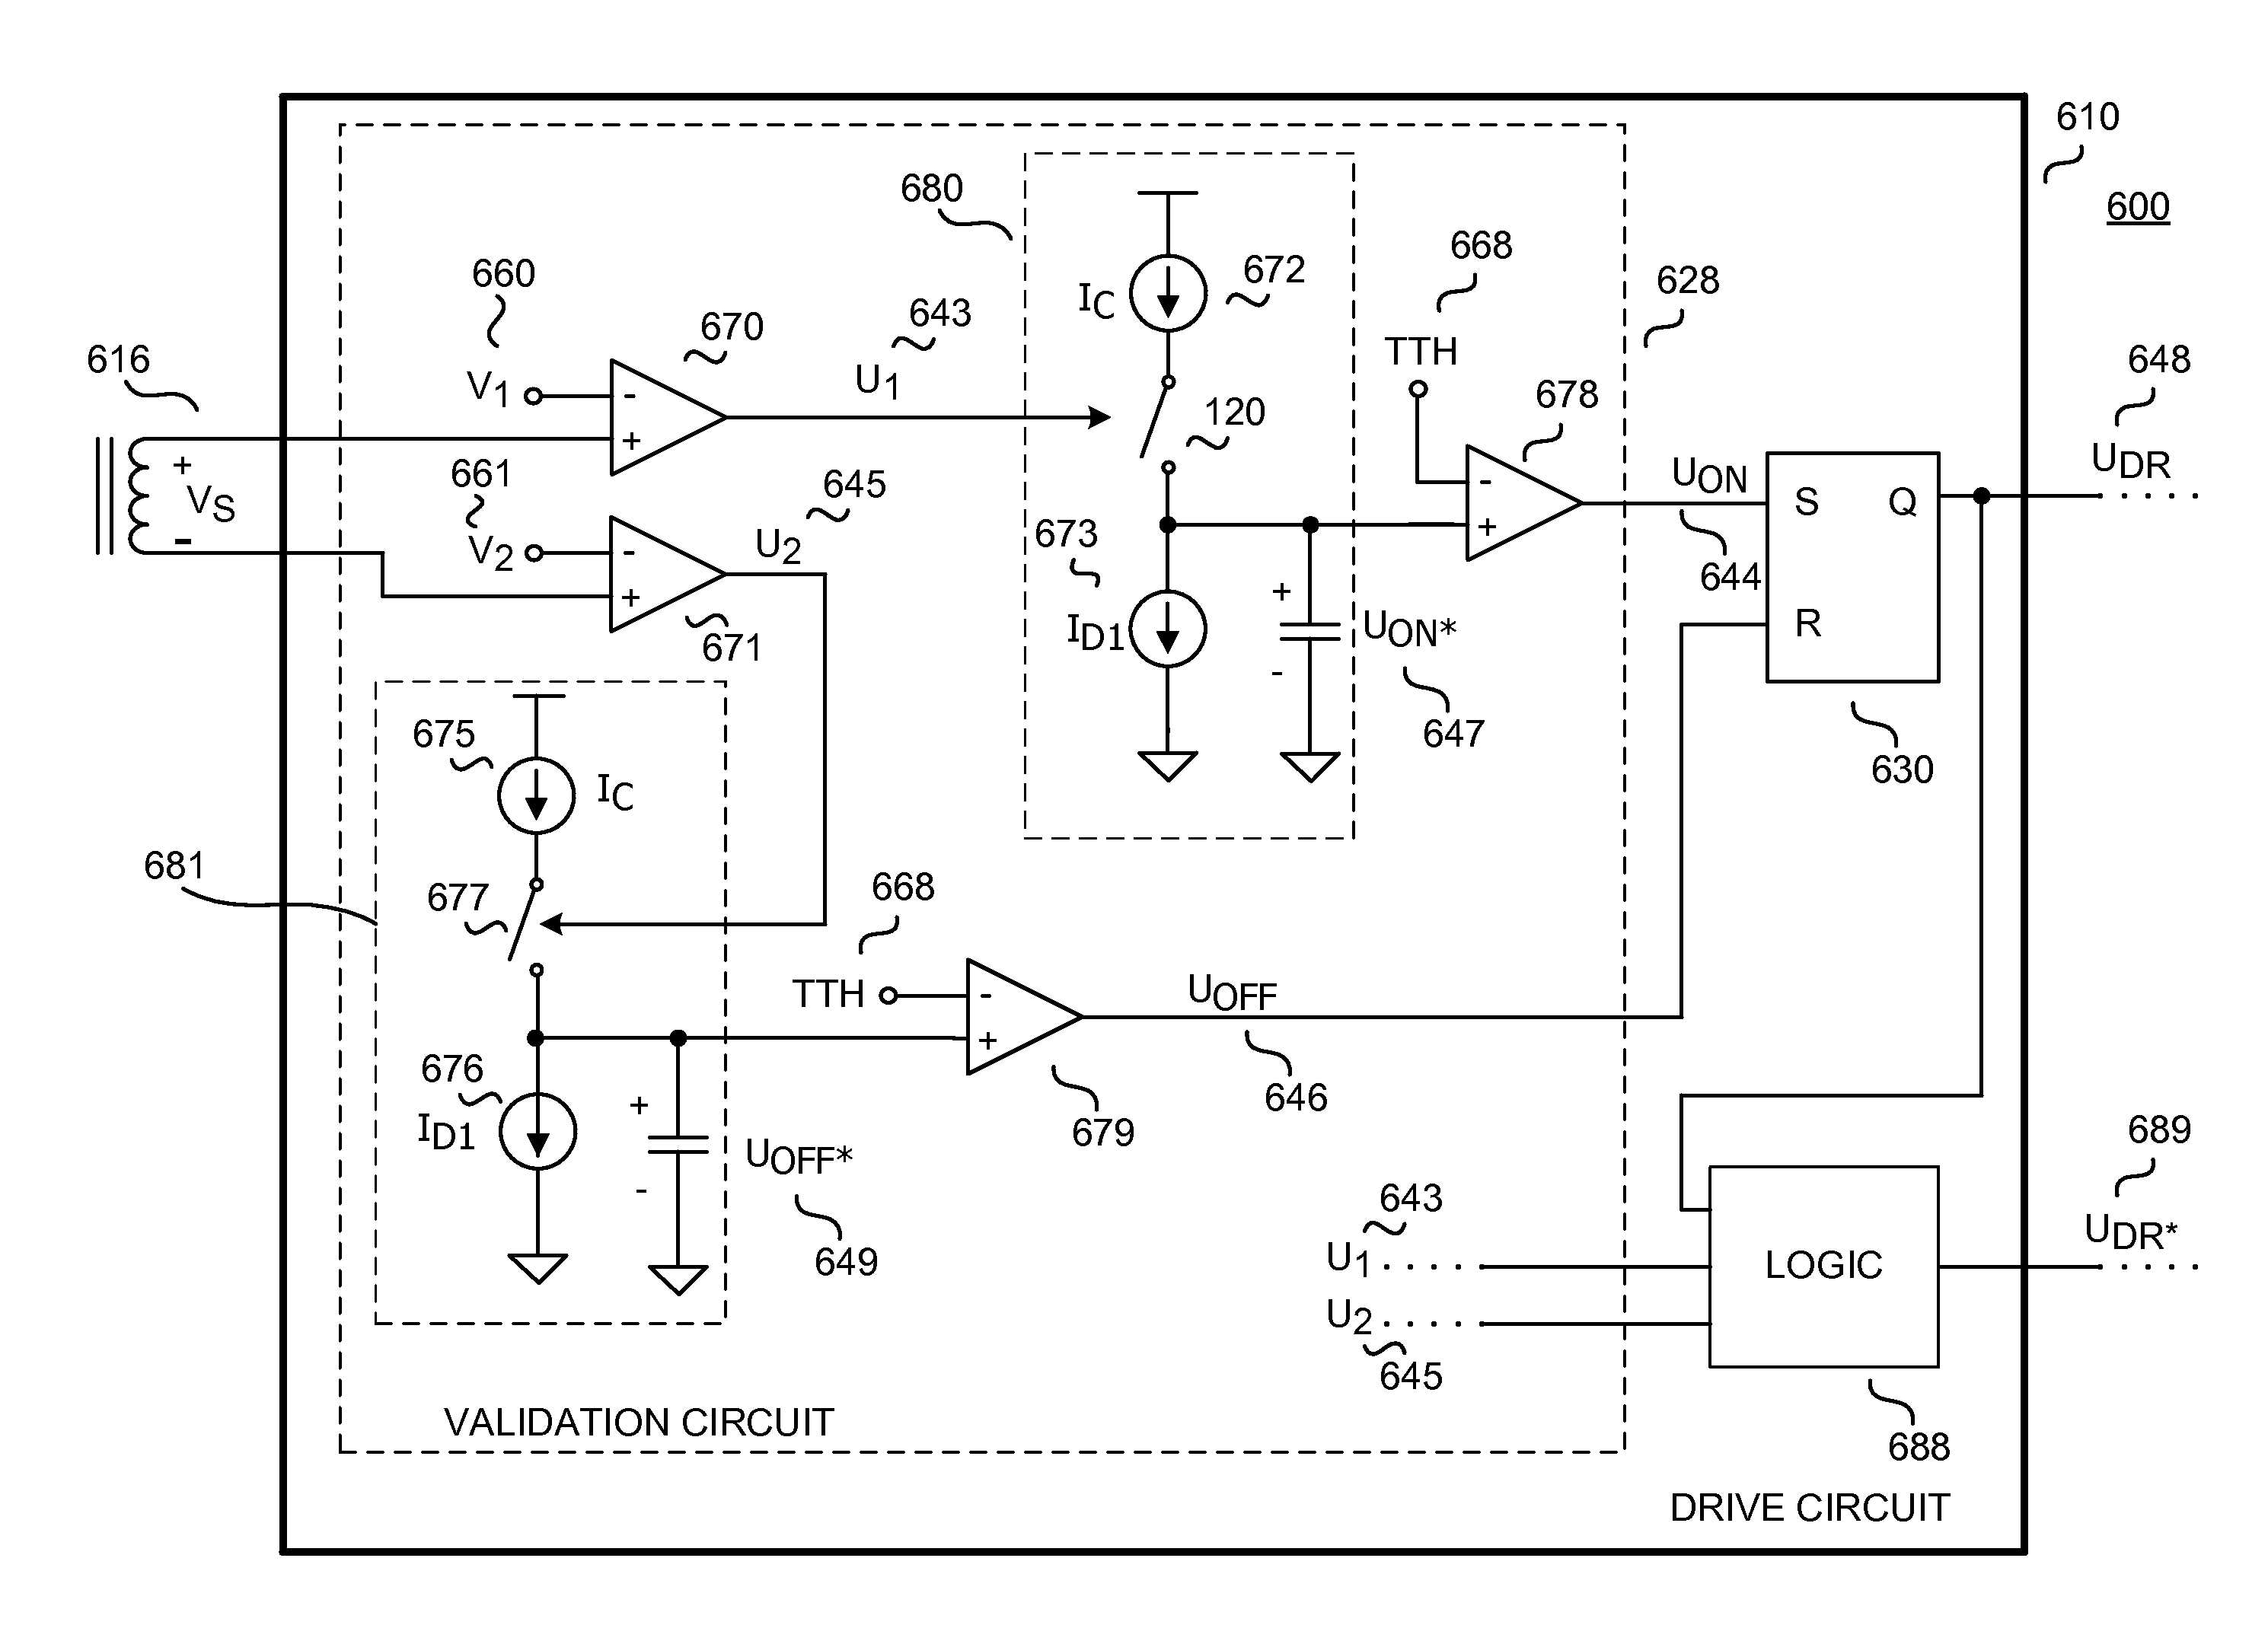 Switch controller with validation circuit for improved noise immunity